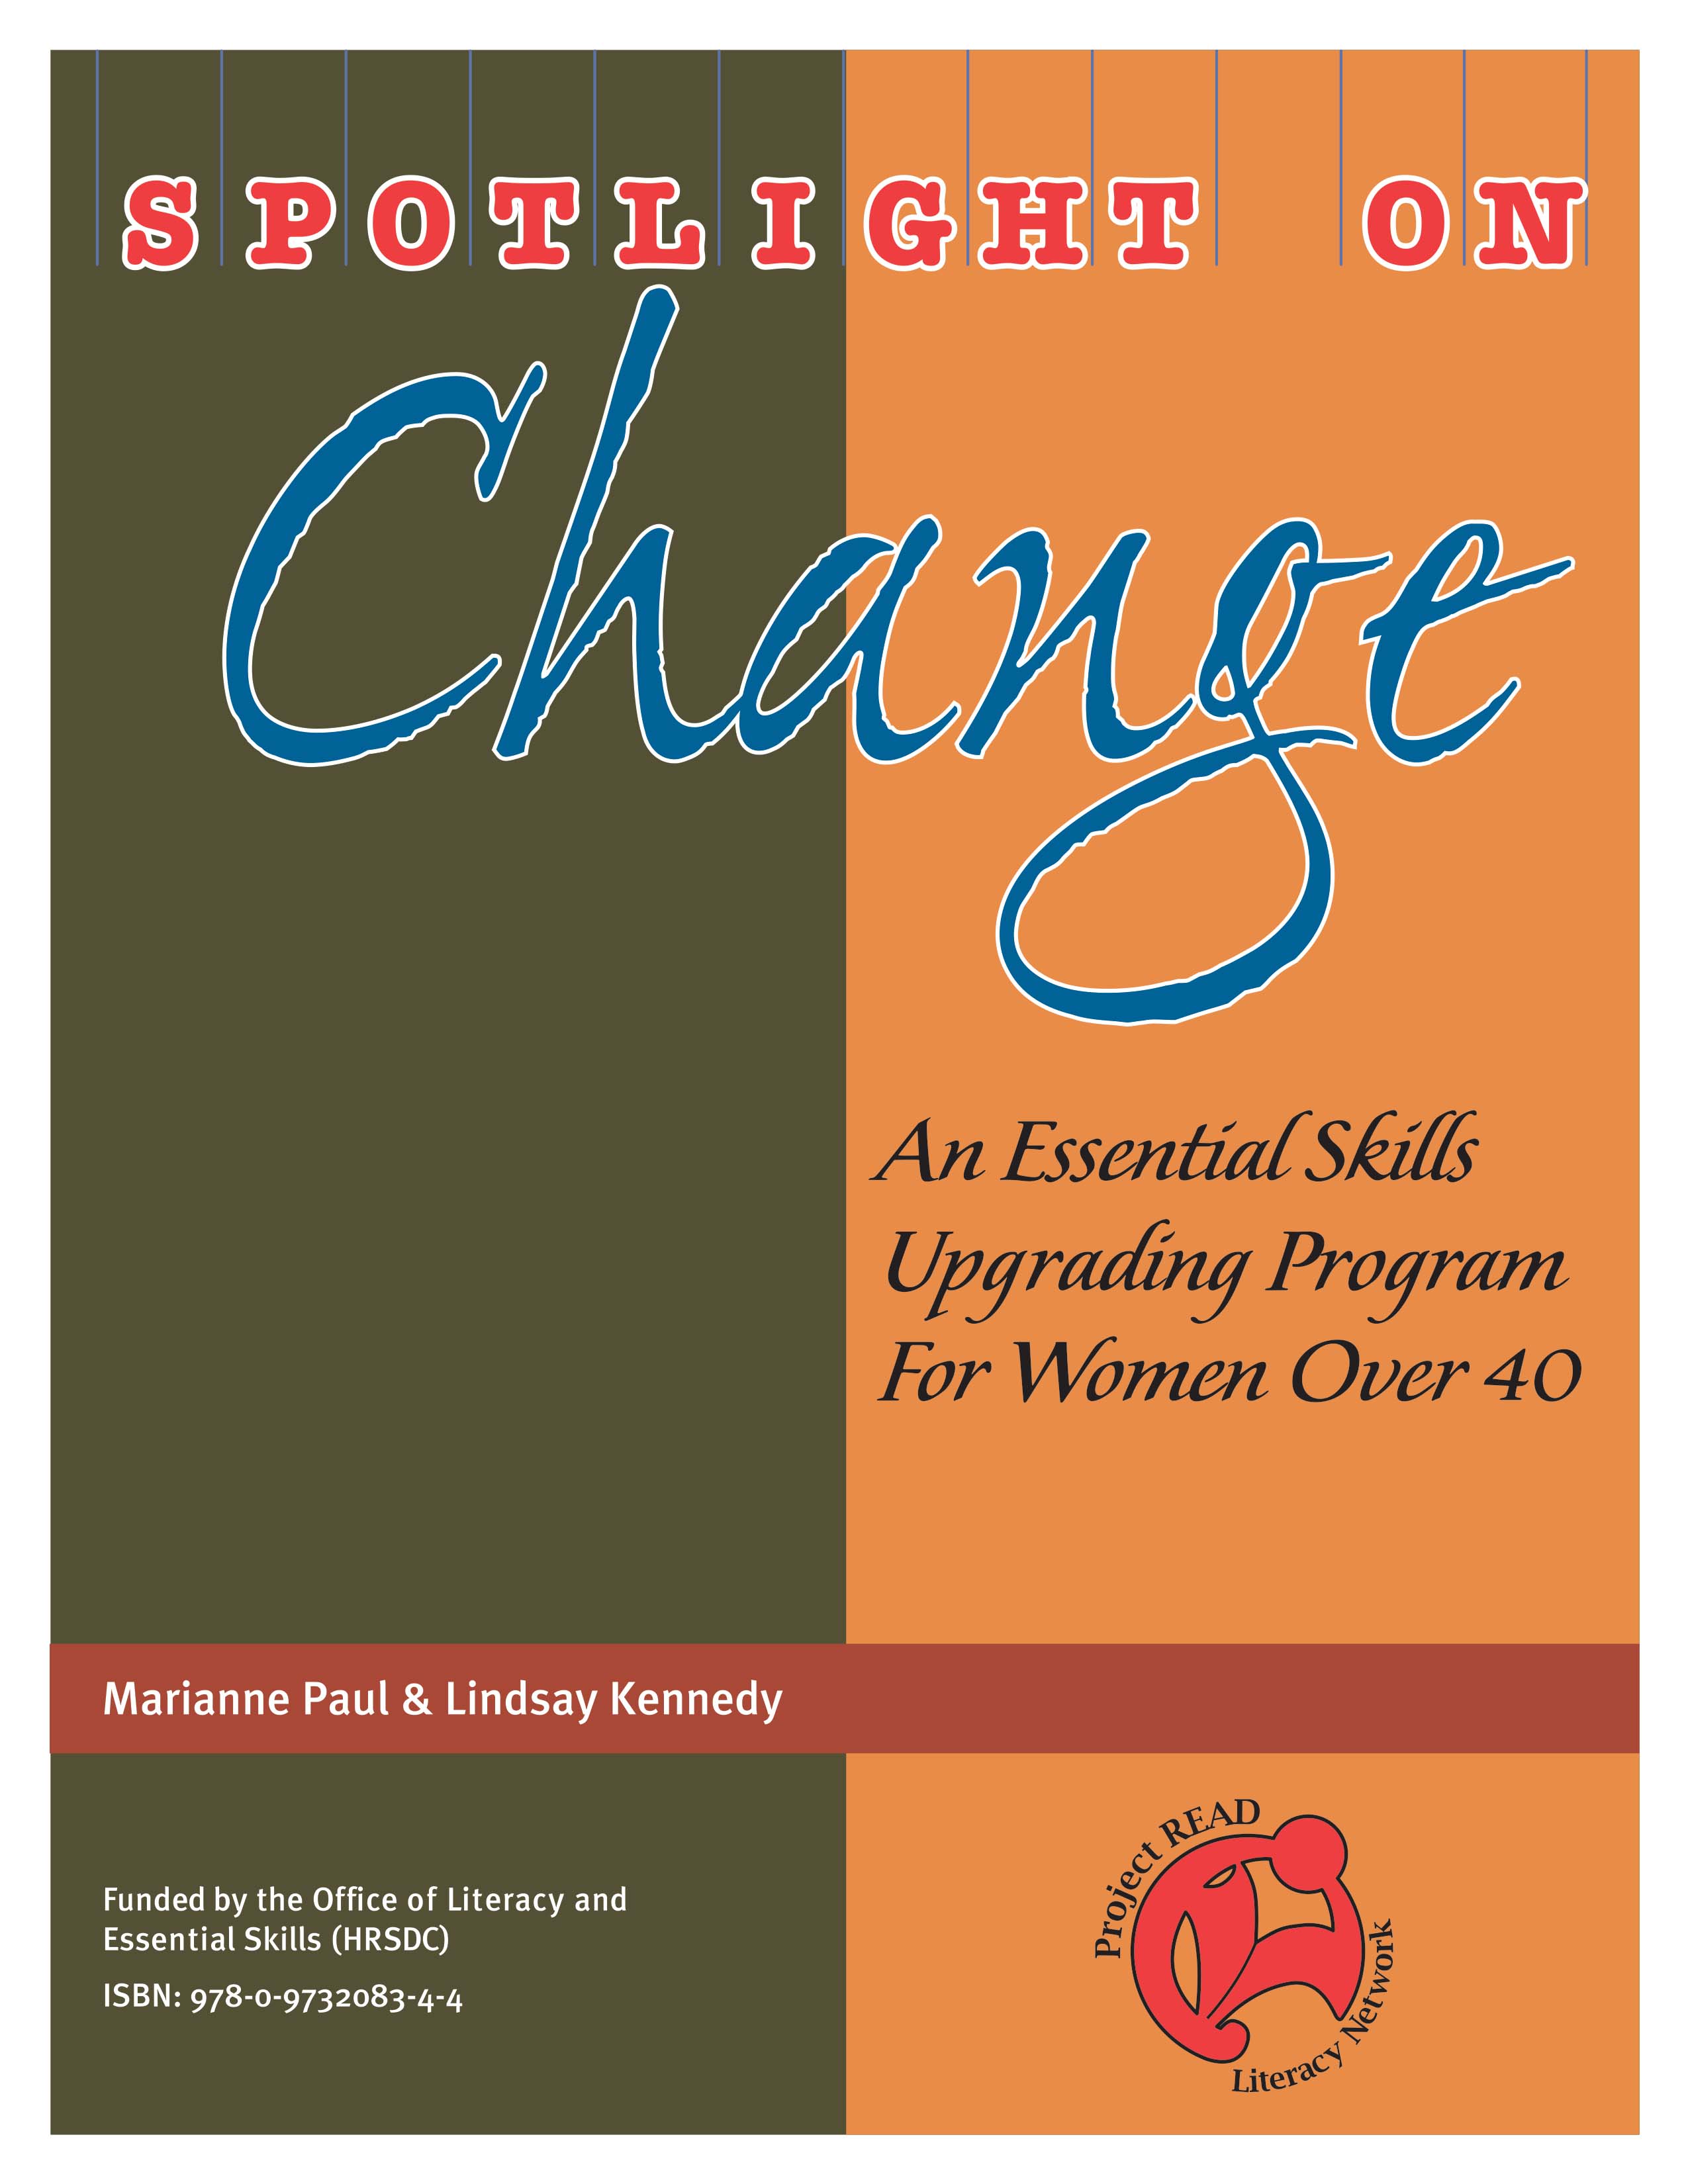 Spotlight On Change - An Essential Skills Upgrading Program for Women Over 40 (English and French Versions, 2010)